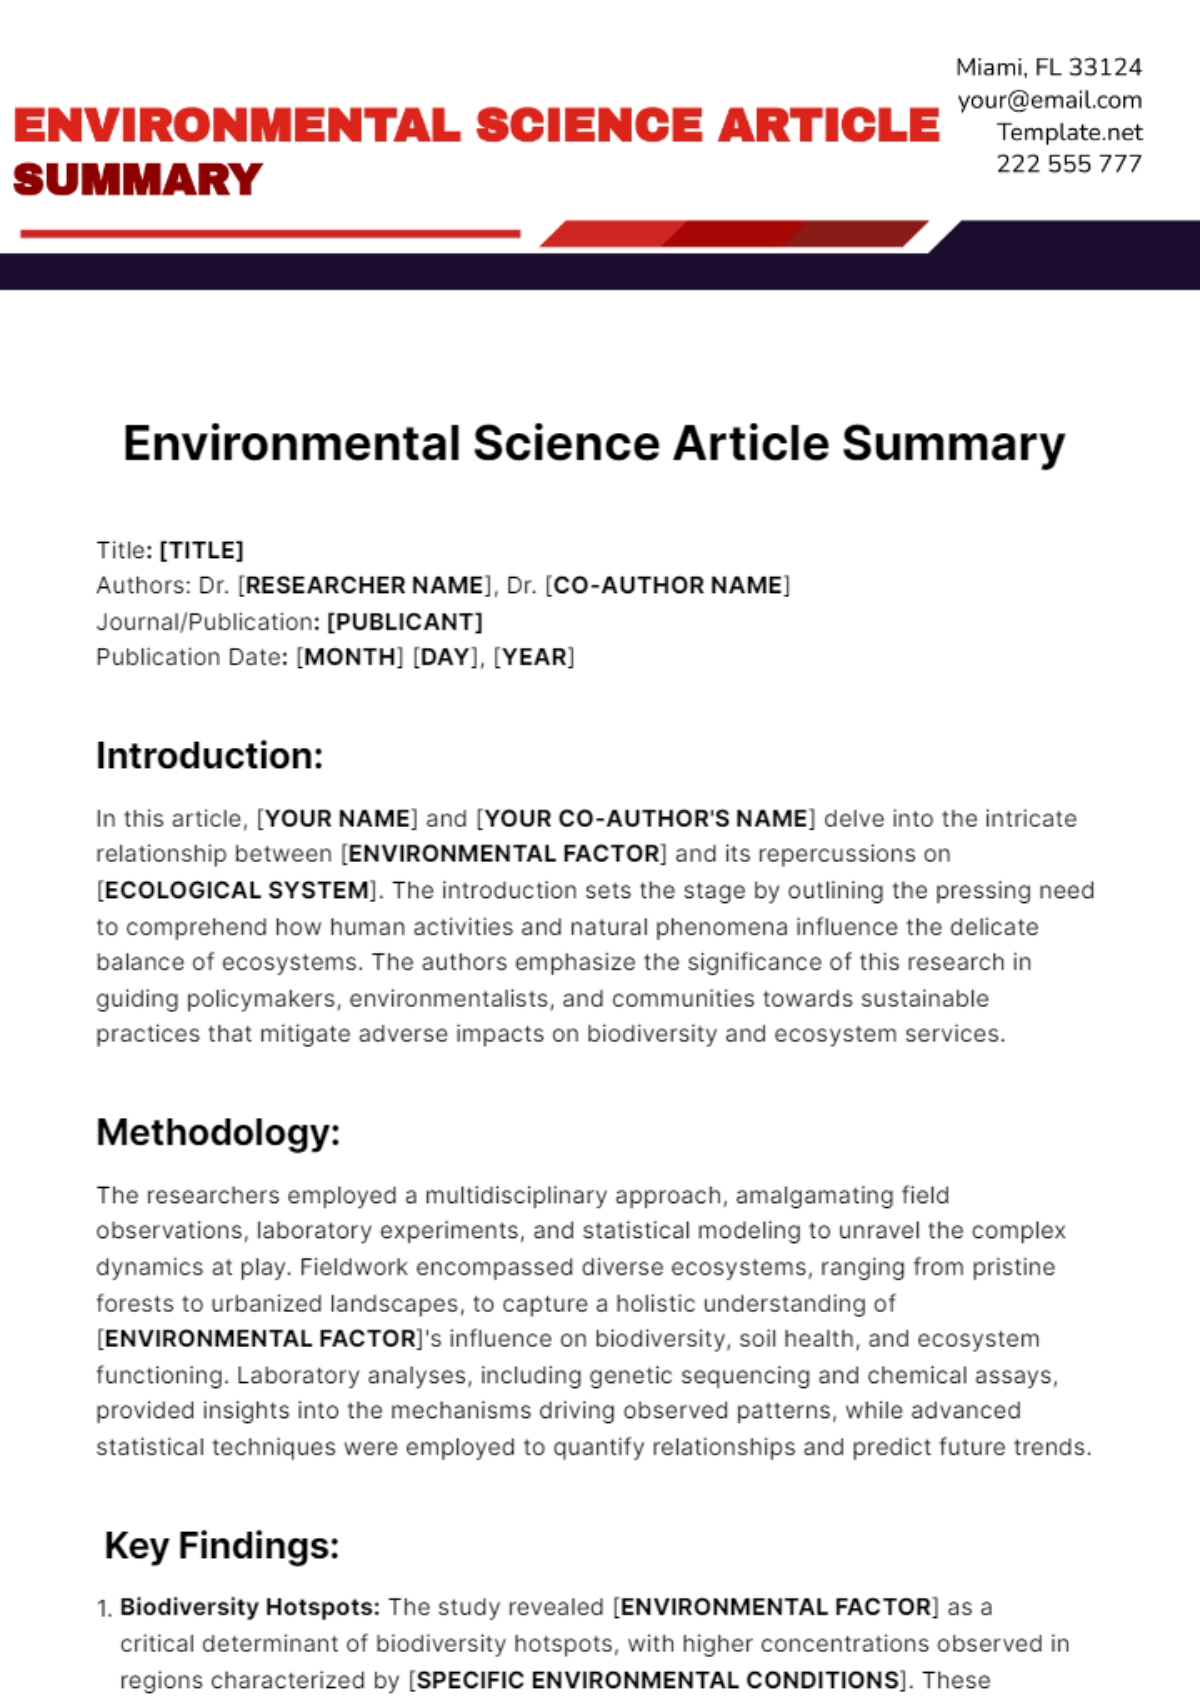 Free Environmental Science Article Summary Template